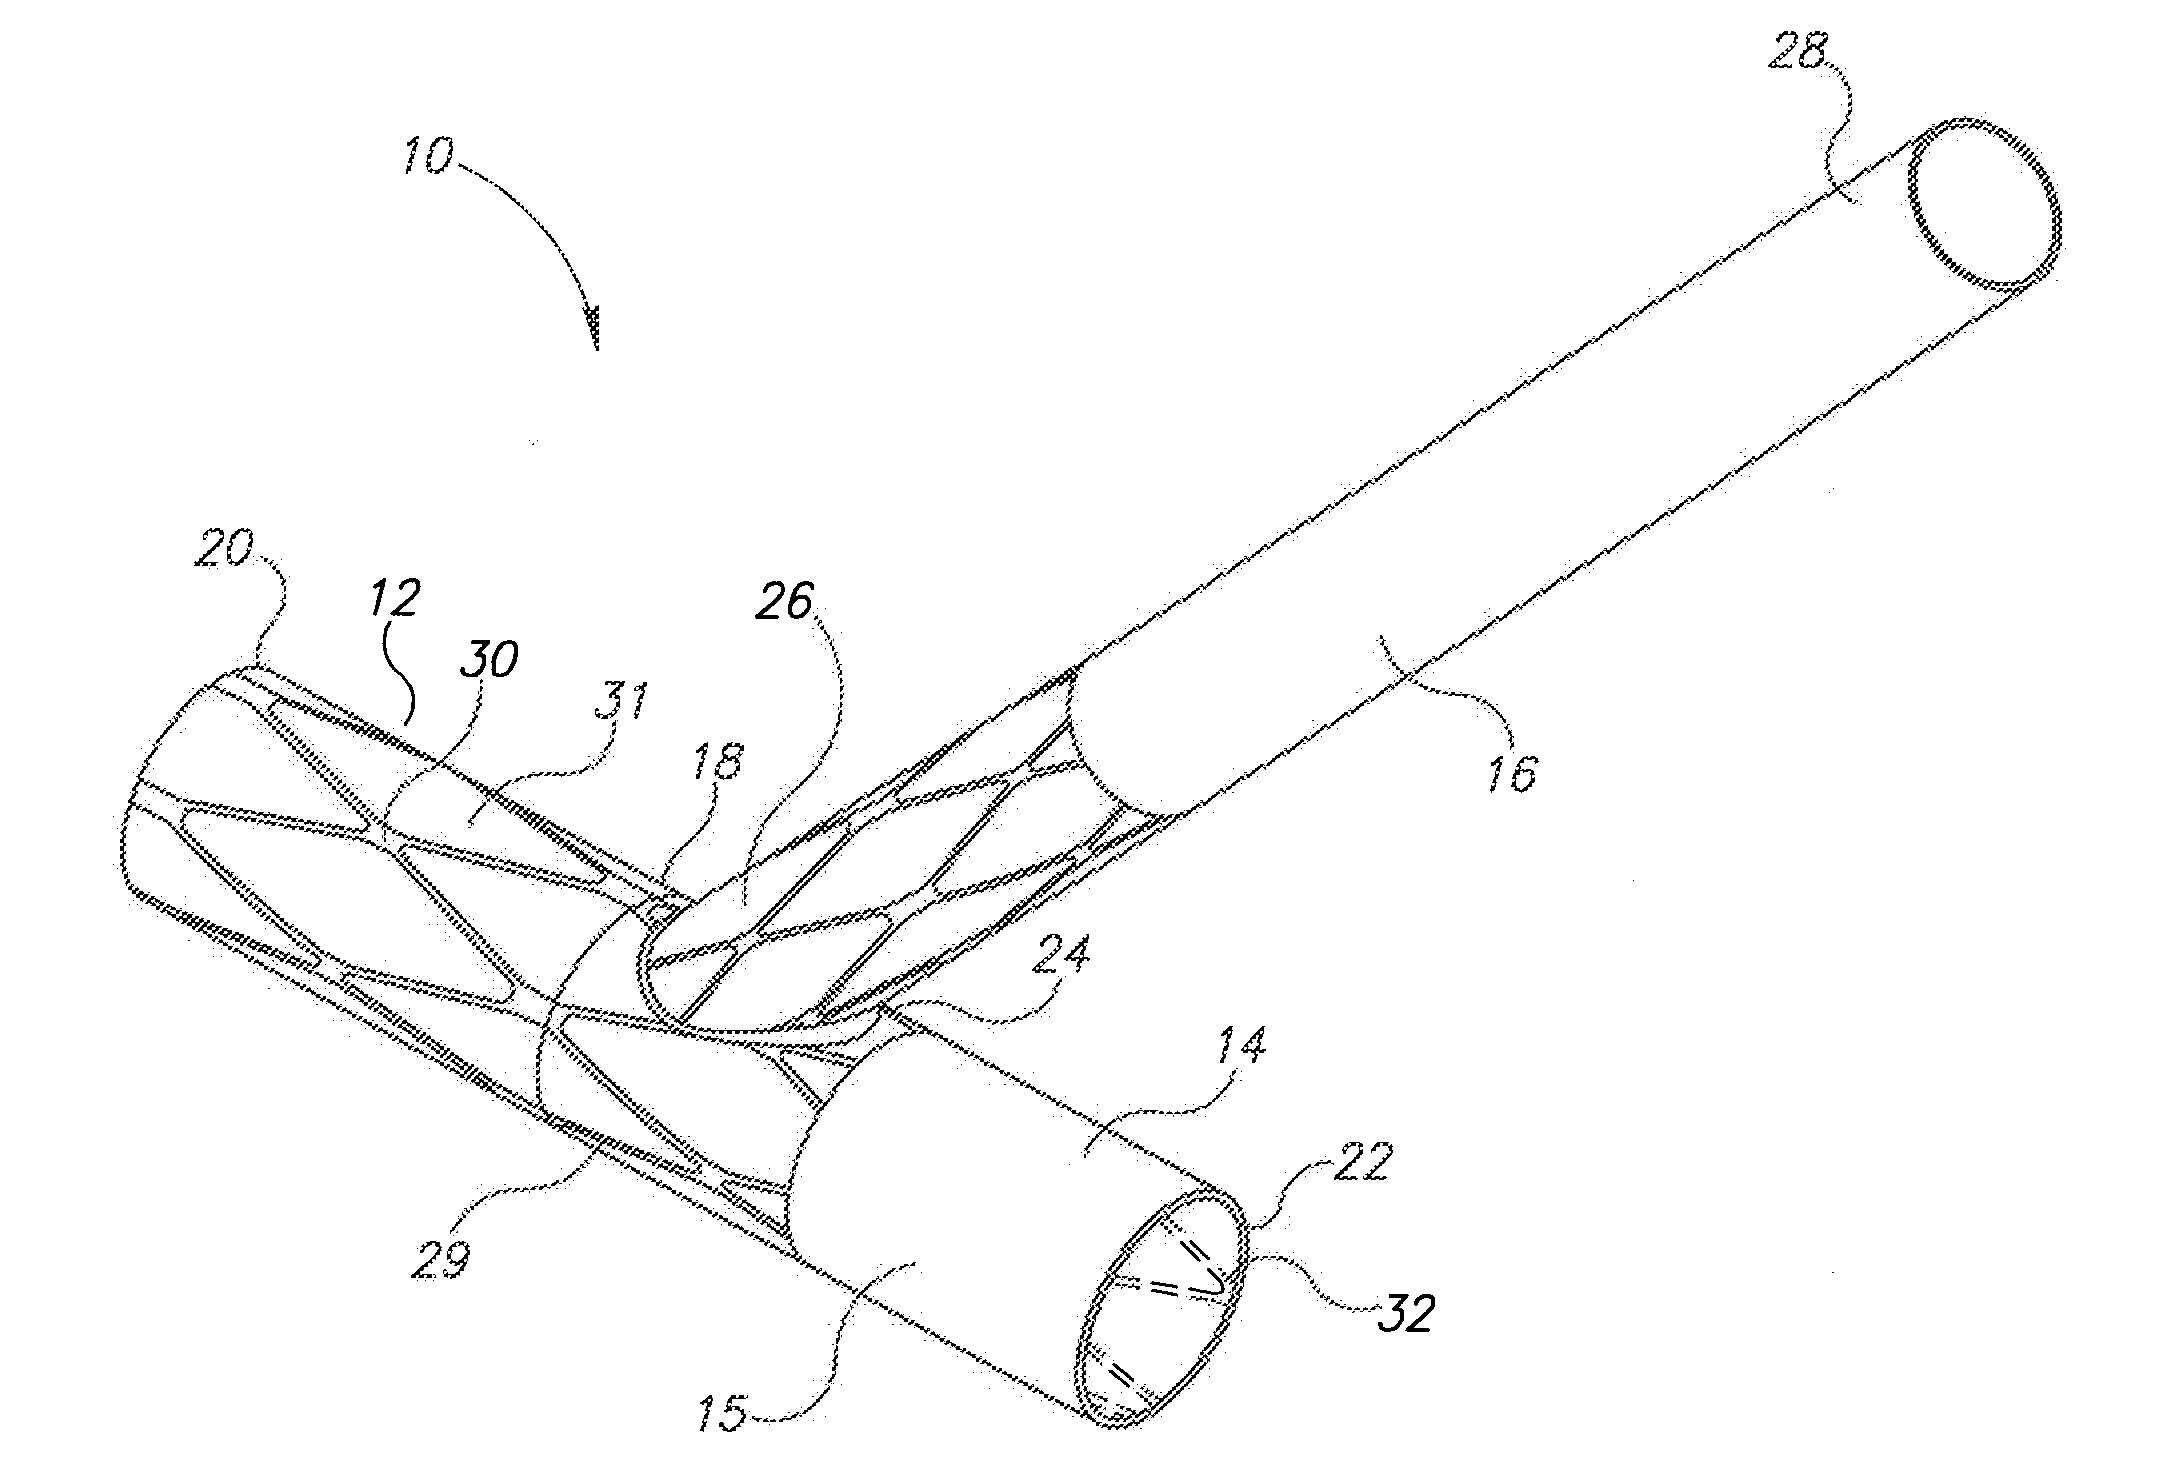 Bypass graft device and delivery system and method